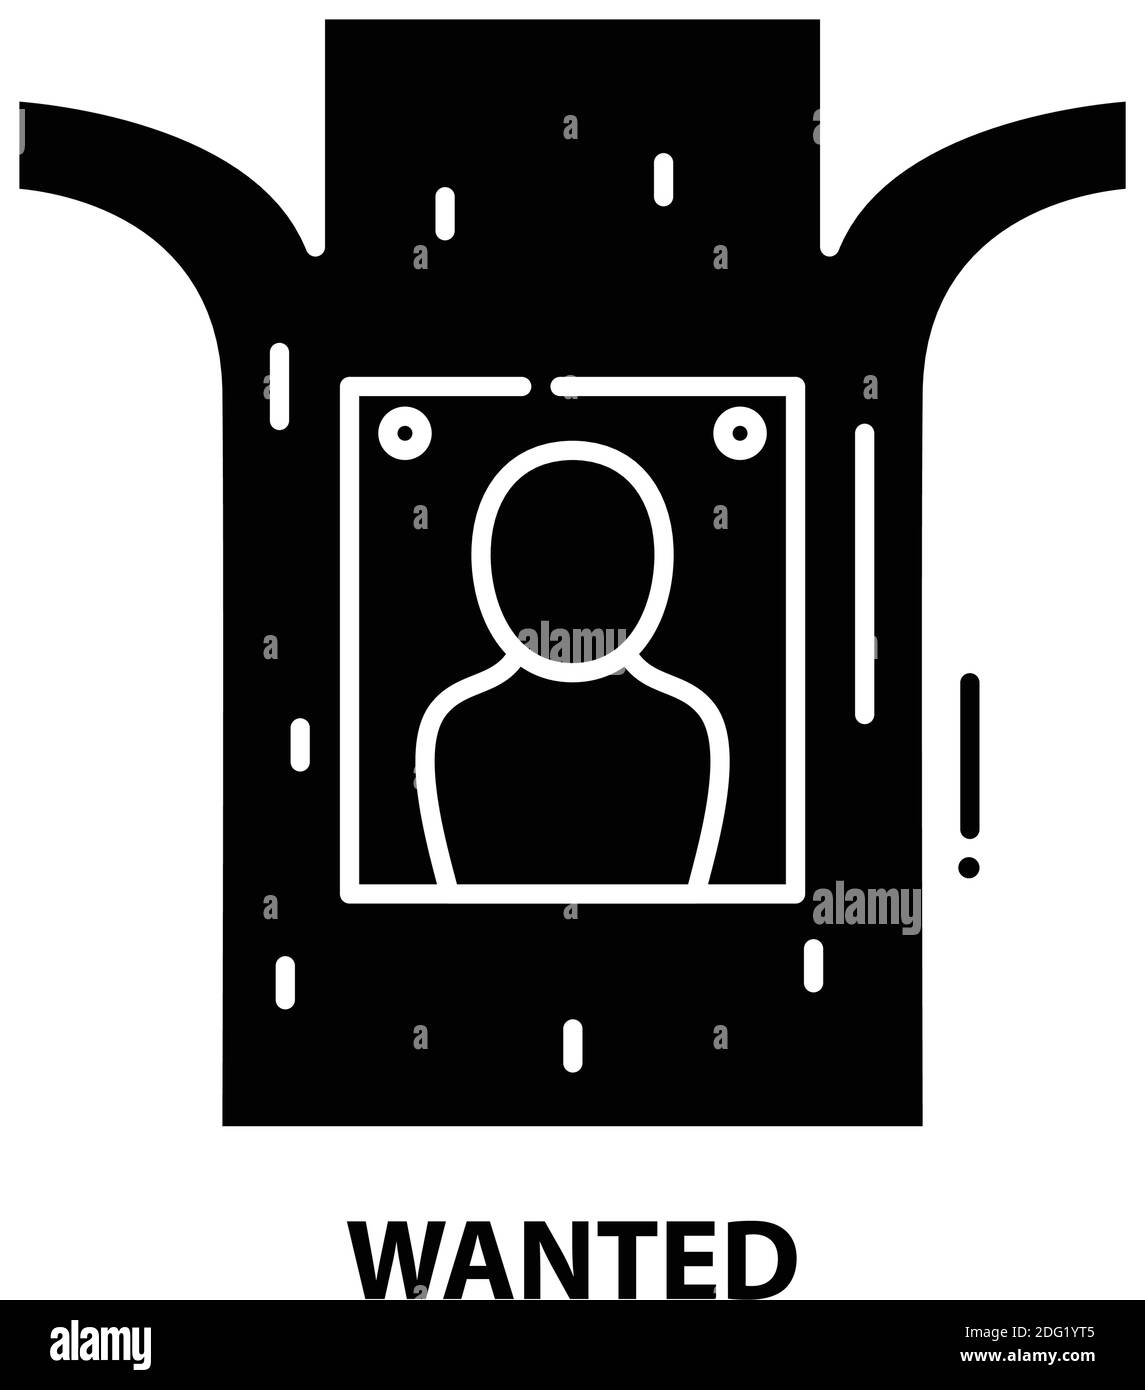 wanted icon, black vector sign with editable strokes, concept illustration Stock Vector